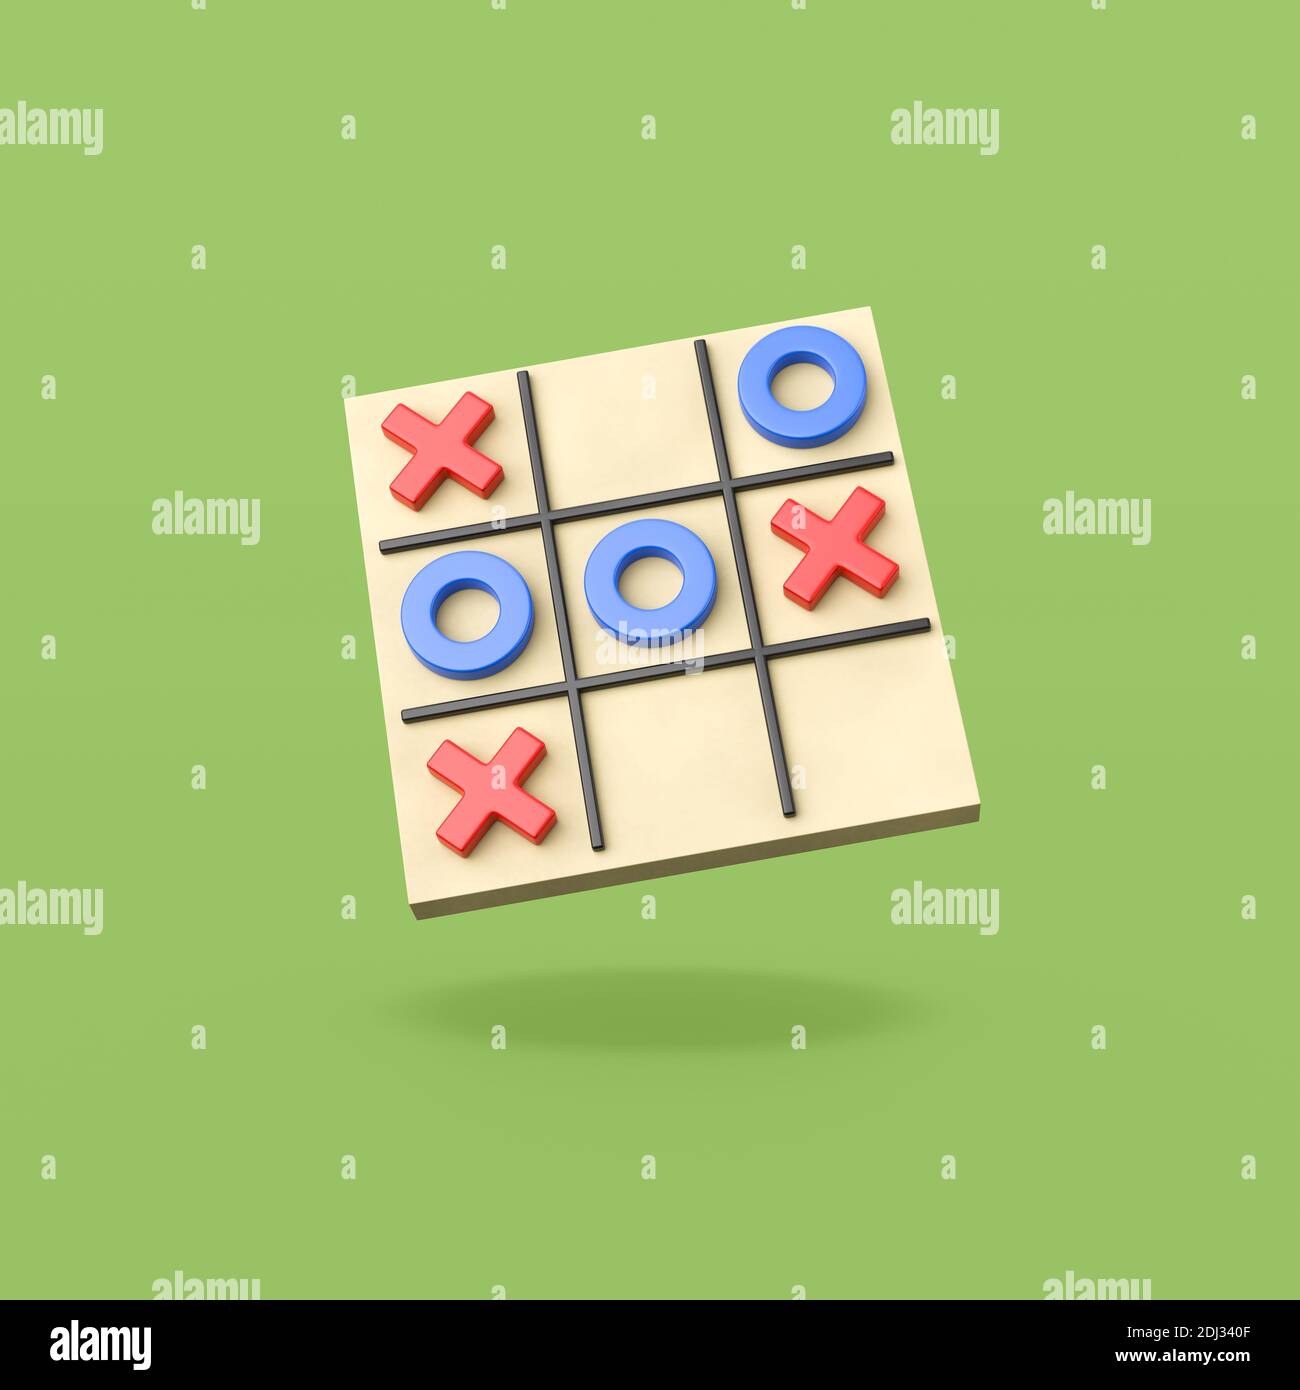 Kids Ally Entertaining Wooden Tic Tac Toe Solitaire In Travel Board Game